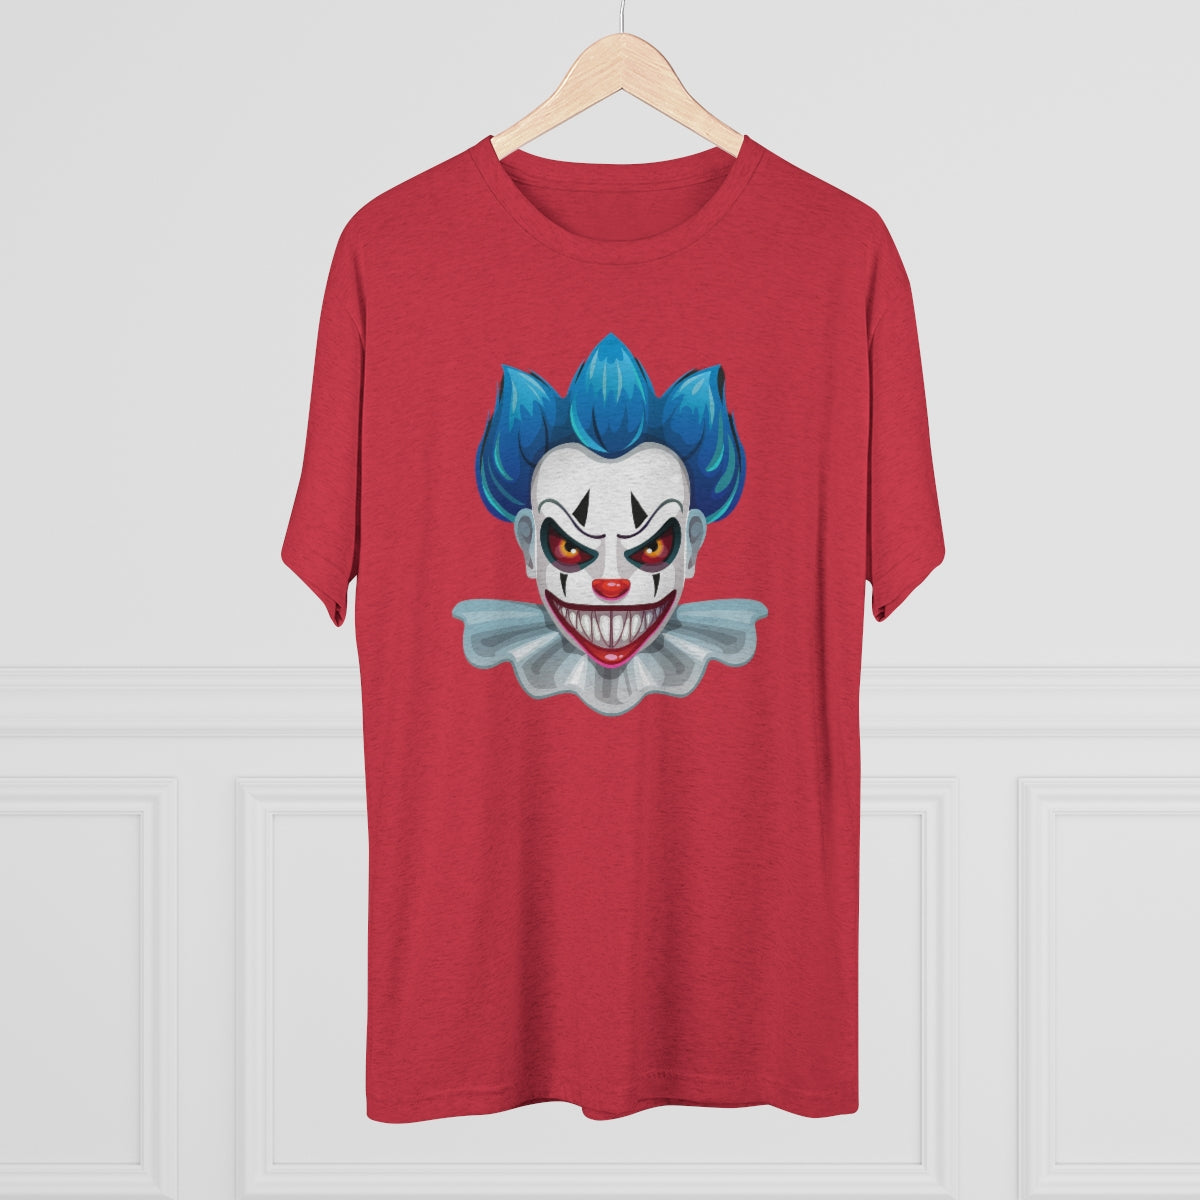 Special Collection – Phobia: Coulrophobia – Unisex Tri-Blend Crew Tee